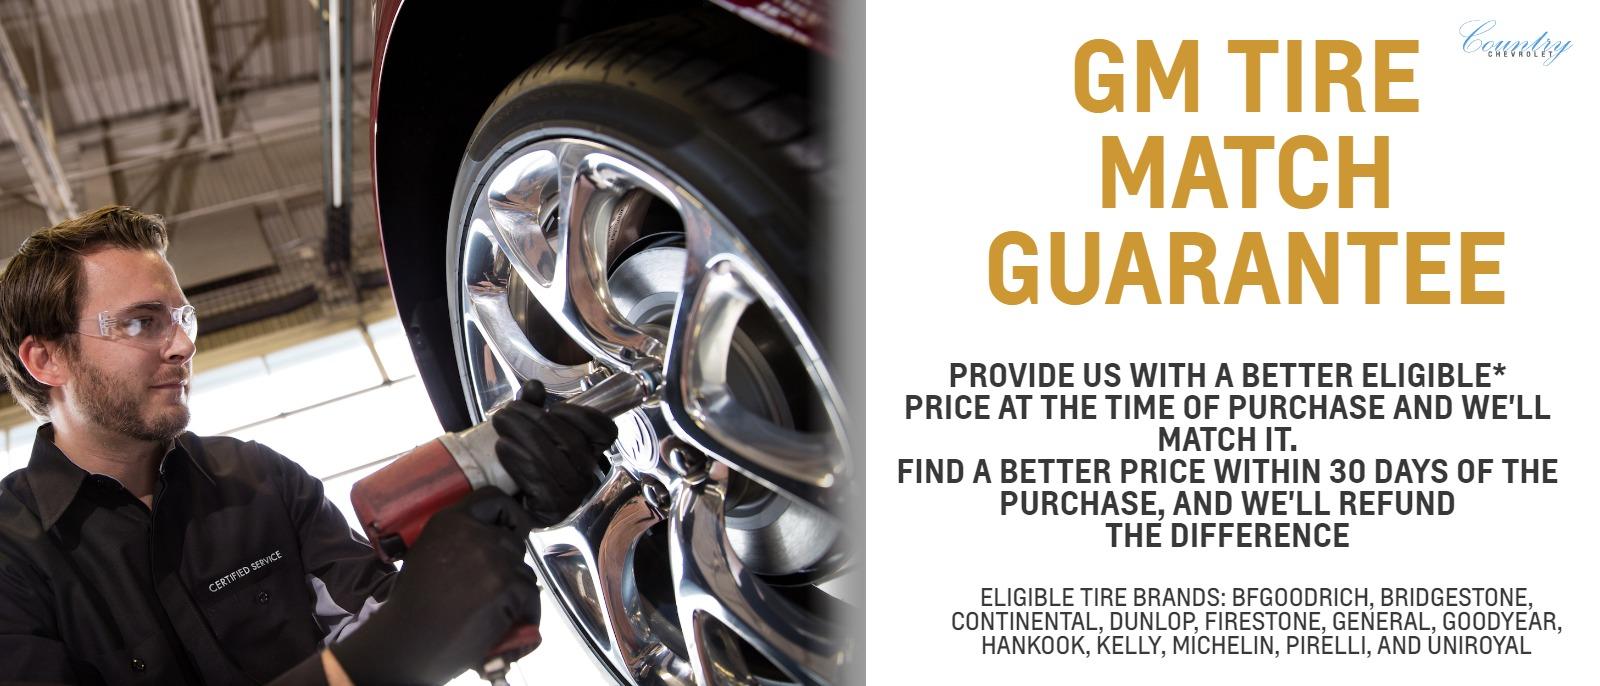 GM Tire Match Guarantee
Provide us with a better eligible* price at the time of purchase and we'll match it. Find a better price within 30 days of the purchase, and we'll refund the difference

Eligible Tire Brands: BFGoodrich, Bridgestone, Continental, Dunlop, Firestone, General, Goodyear, Hankook, Kelly, Michelin, Pirelli, and Uniroyal